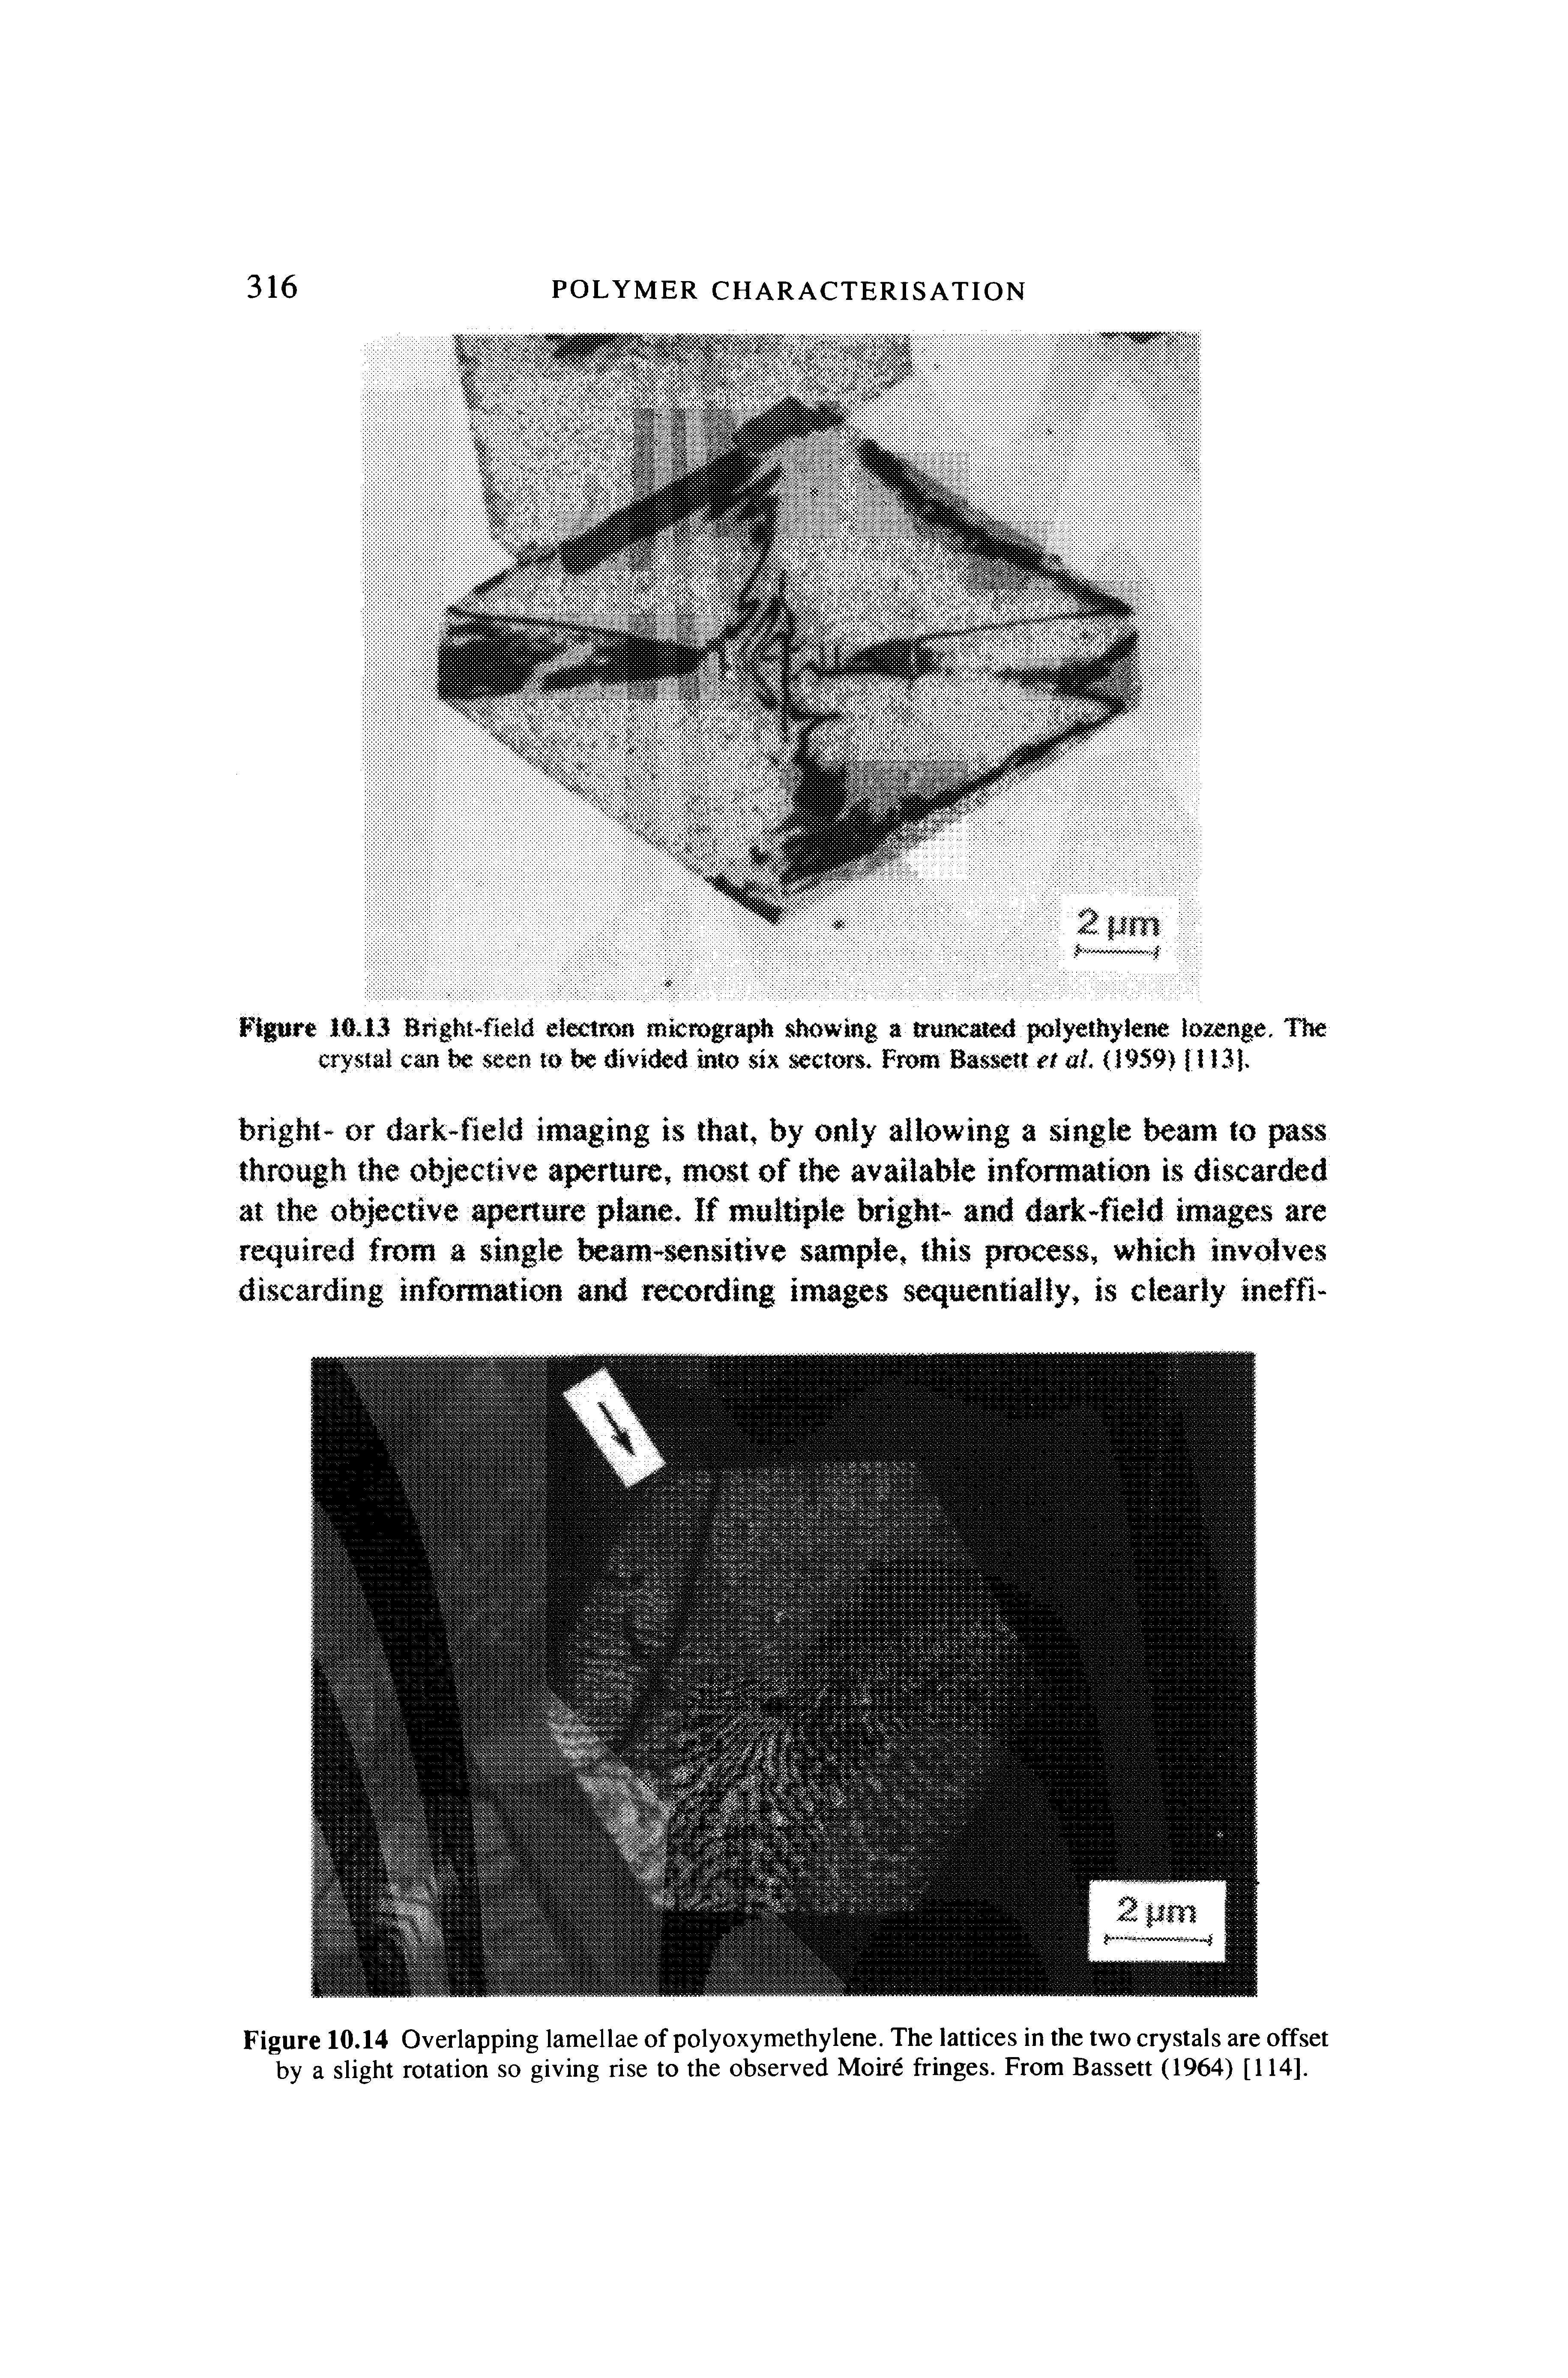 Figure 16.13 Biight-field electton micrograph showing a truncated polyethylene lozenge. The crystal can be seen to be divided into six sectors. From Basseu rr a/. (1959) [1131.